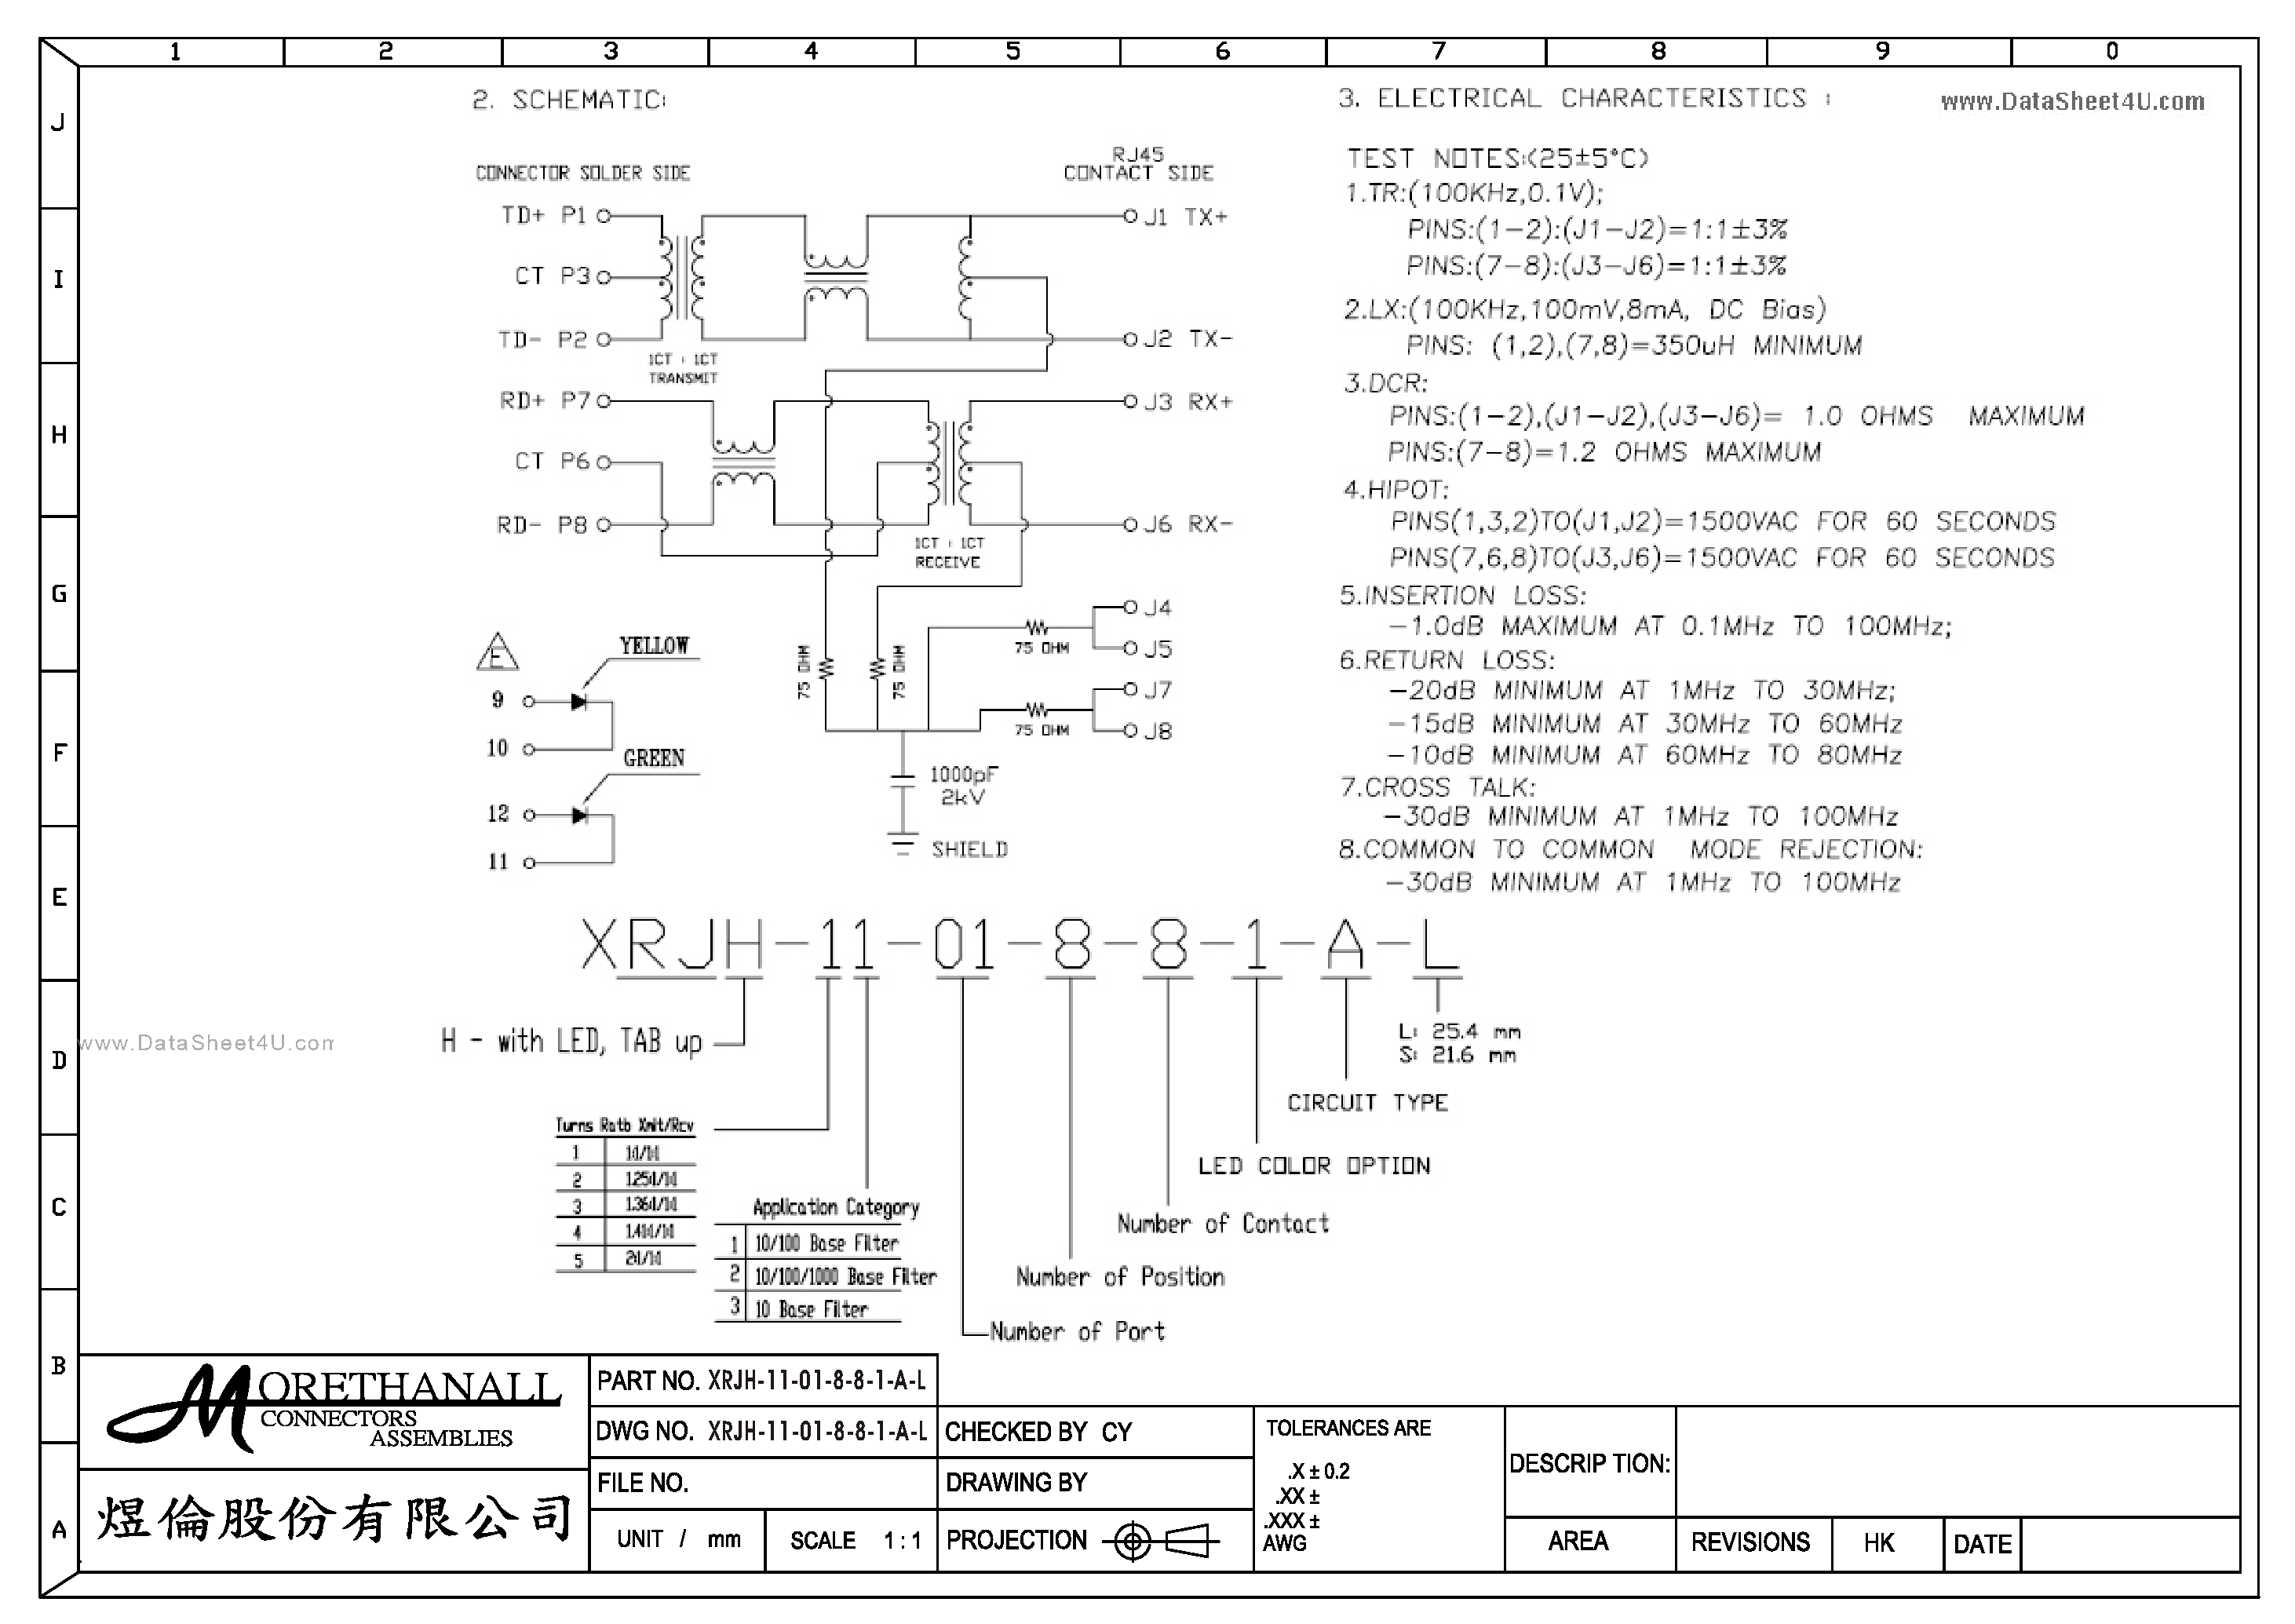 Datasheet XRJH-11-01-8-8-1-A-L - Connector page 2